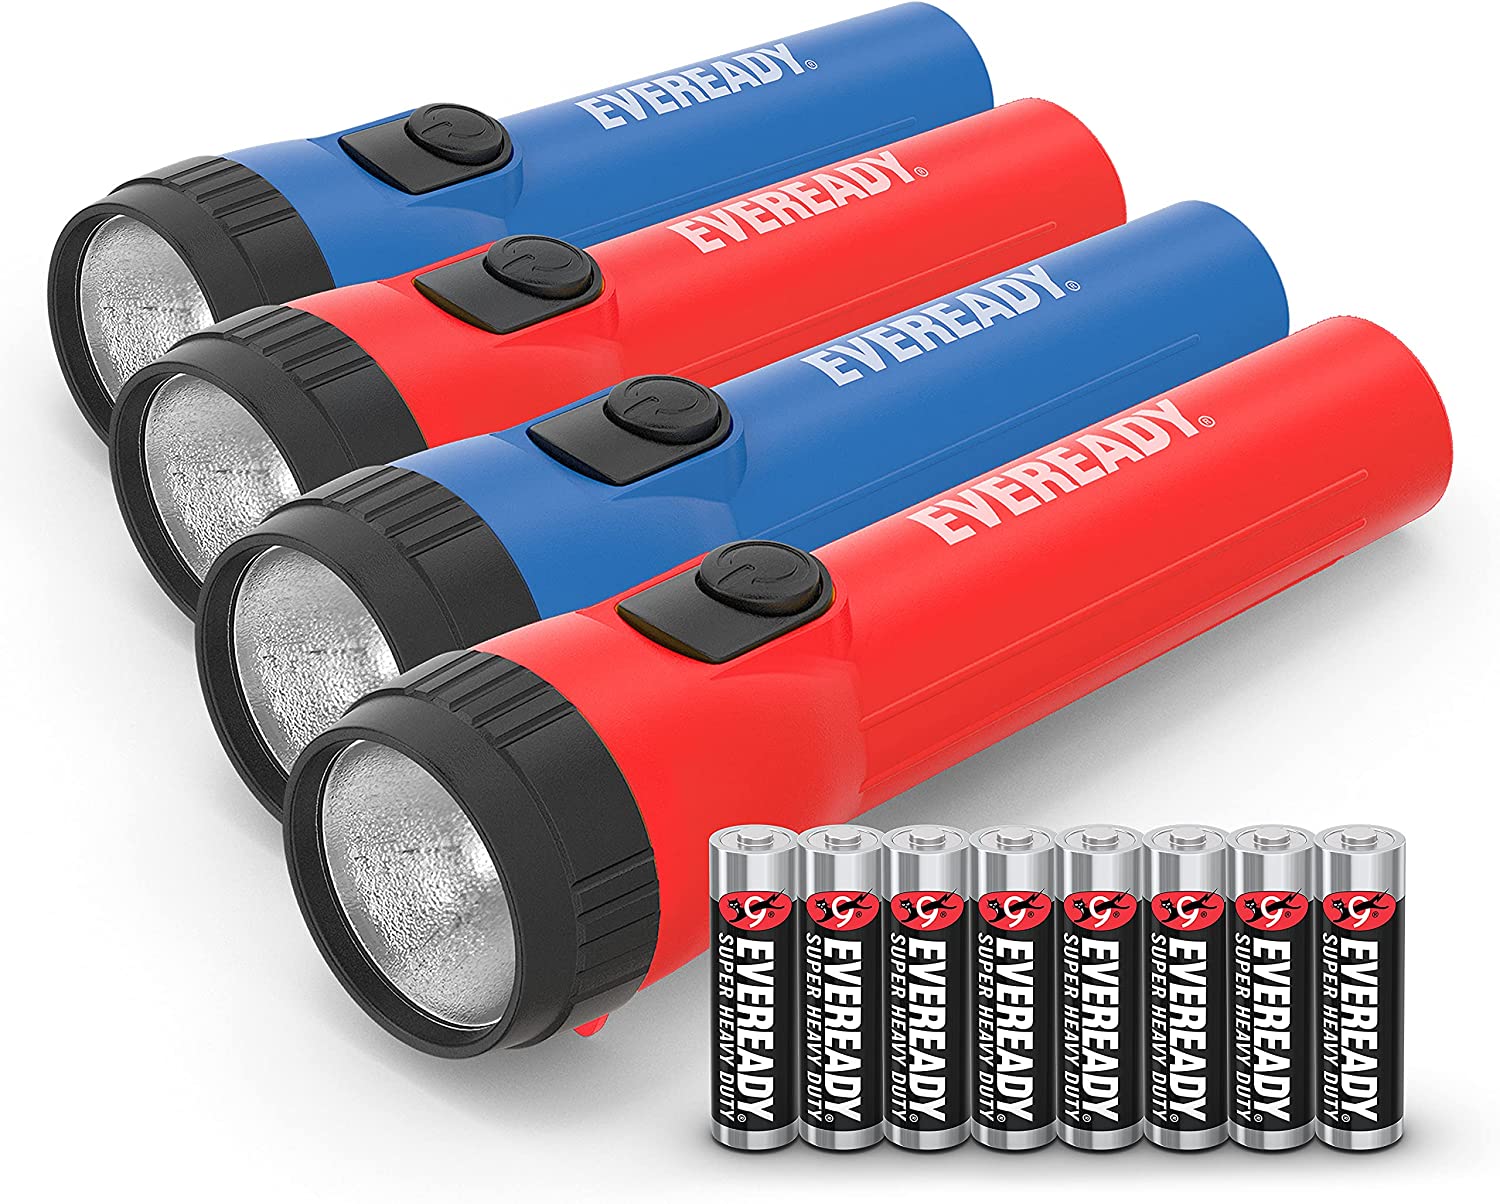 4-Pack Eveready LED Flashlight Multi-Pack w/ Batteries $5.50 + Free Shipping w/ Amazon Prime or Orders $25+